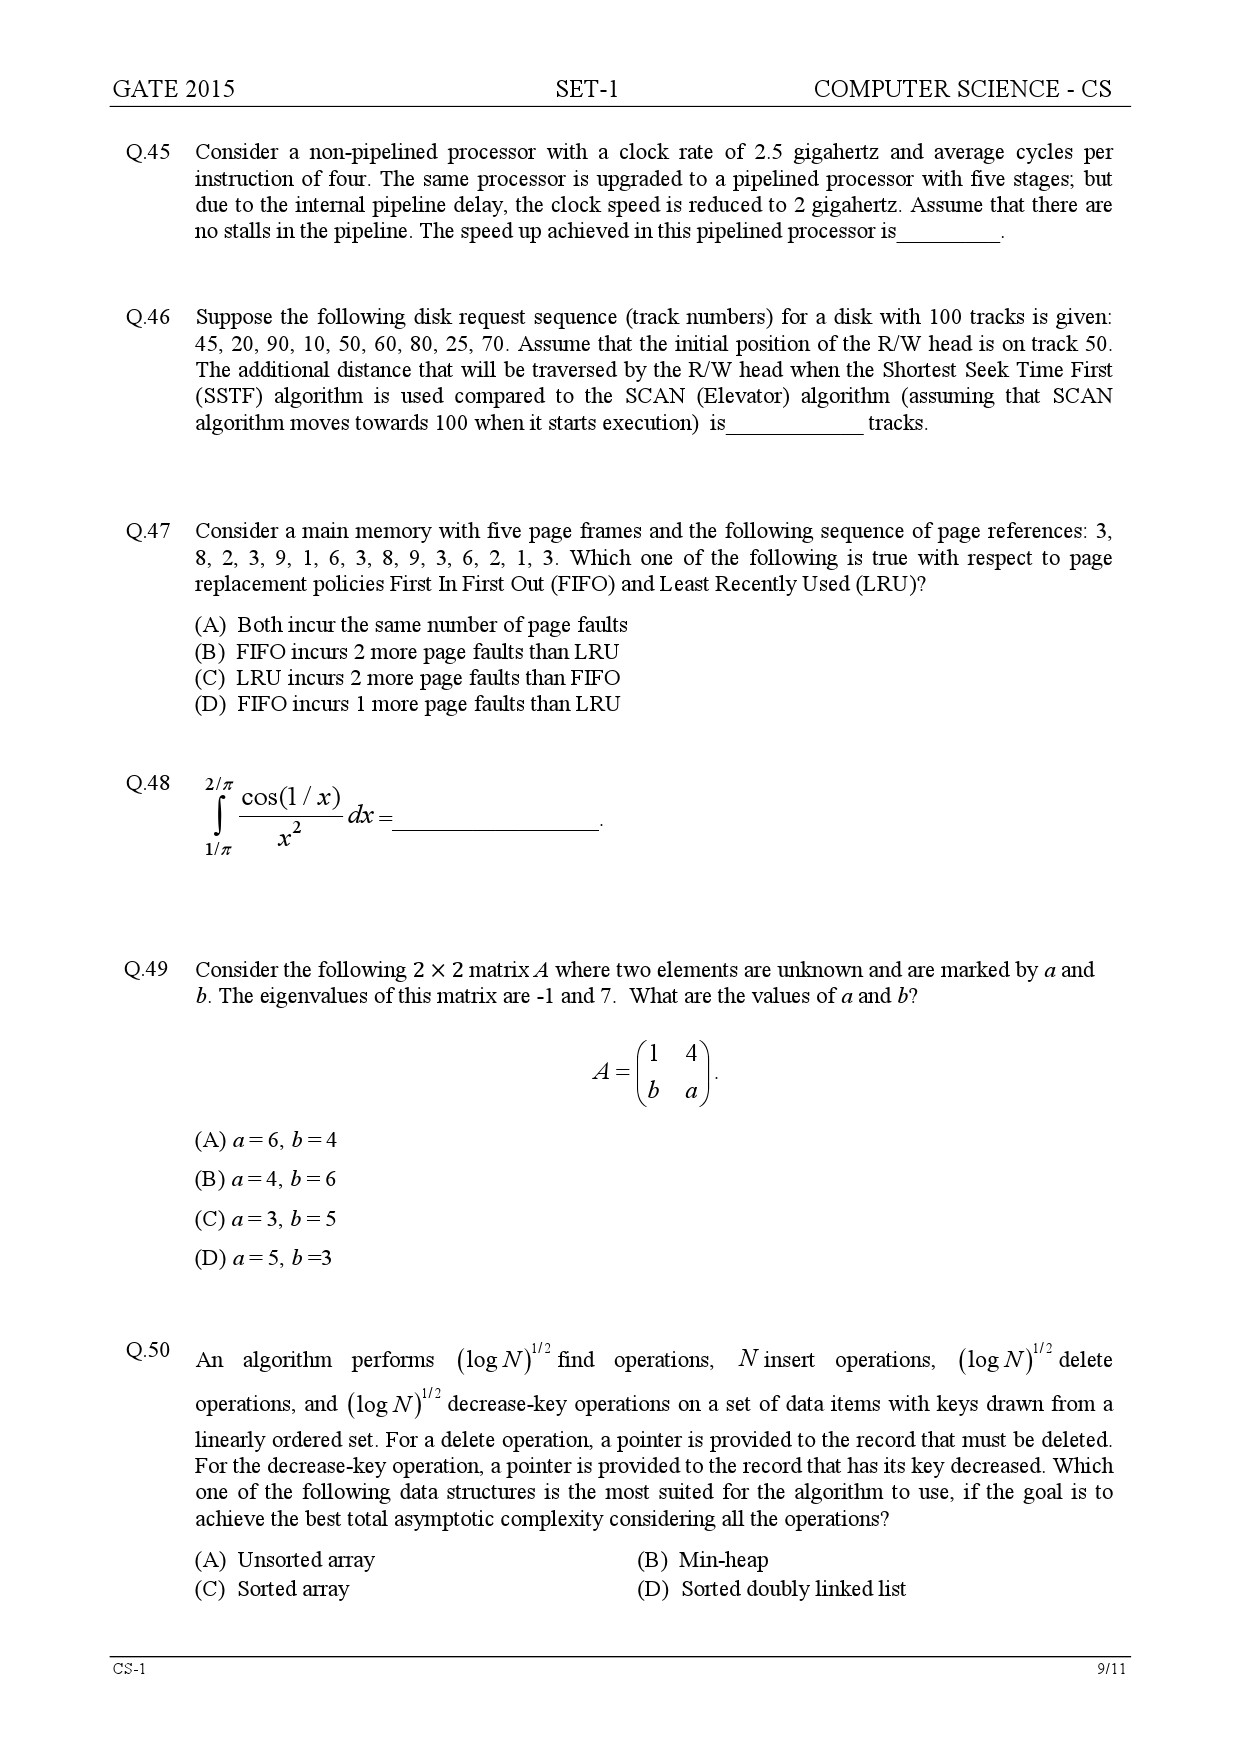 GATE Exam Question Paper 2015 Computer Science and Information Technology Set 1 9